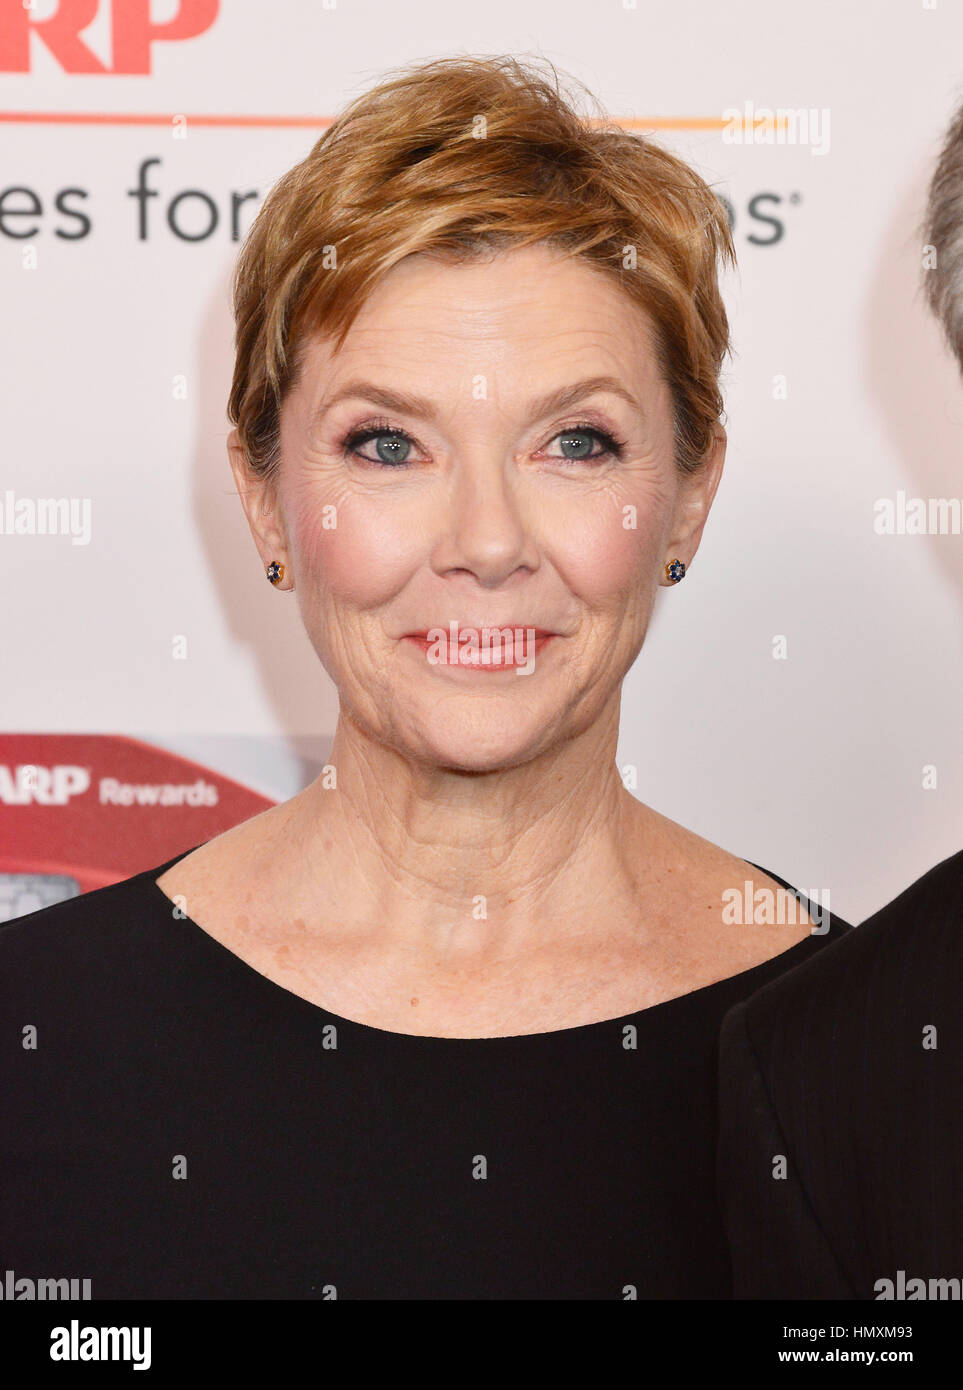 Los Angeles, USA. 06th Feb, 2017. a Annette Bening  arriving at the 16th Annual AARP The Magazine's Movies For Grownups Awards at the Beverly Wilshire Four Seasons Hotel on February 6, 2017 in Beverly Hills, Stock Photo